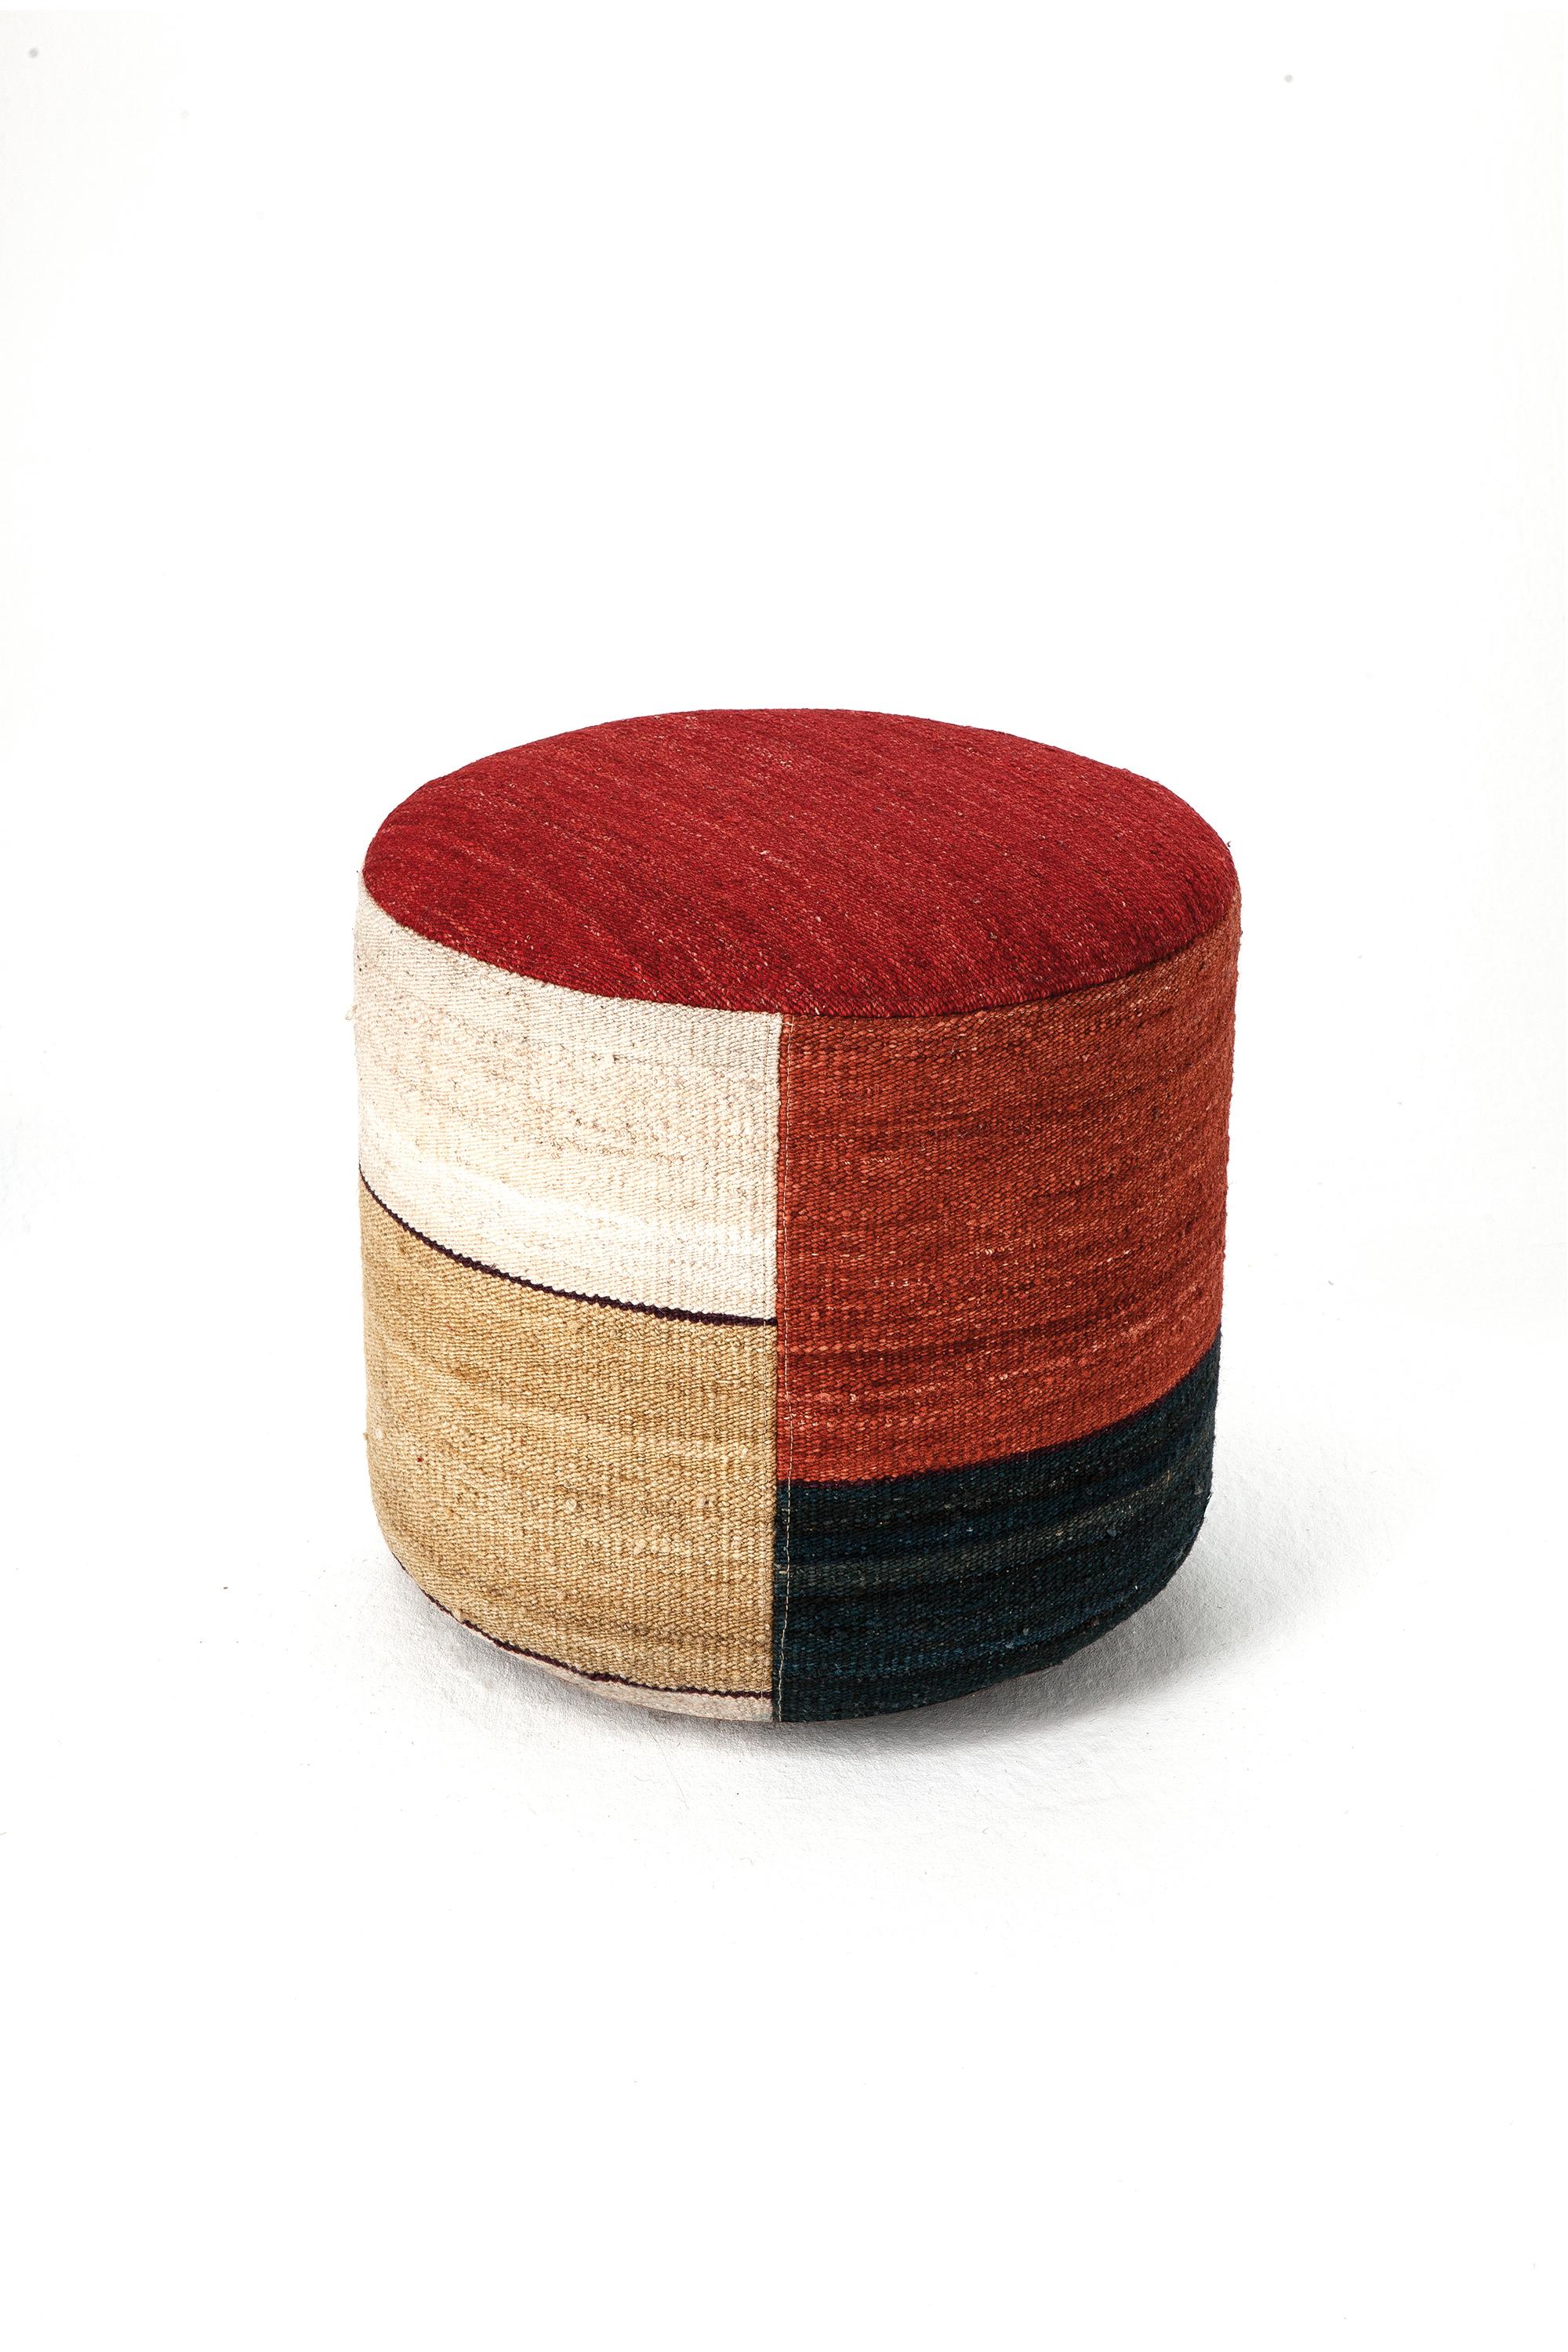 'Kilim 3' Pouf by Nani Marquina and Marcos Catalán for Nanimarquina For Sale 8